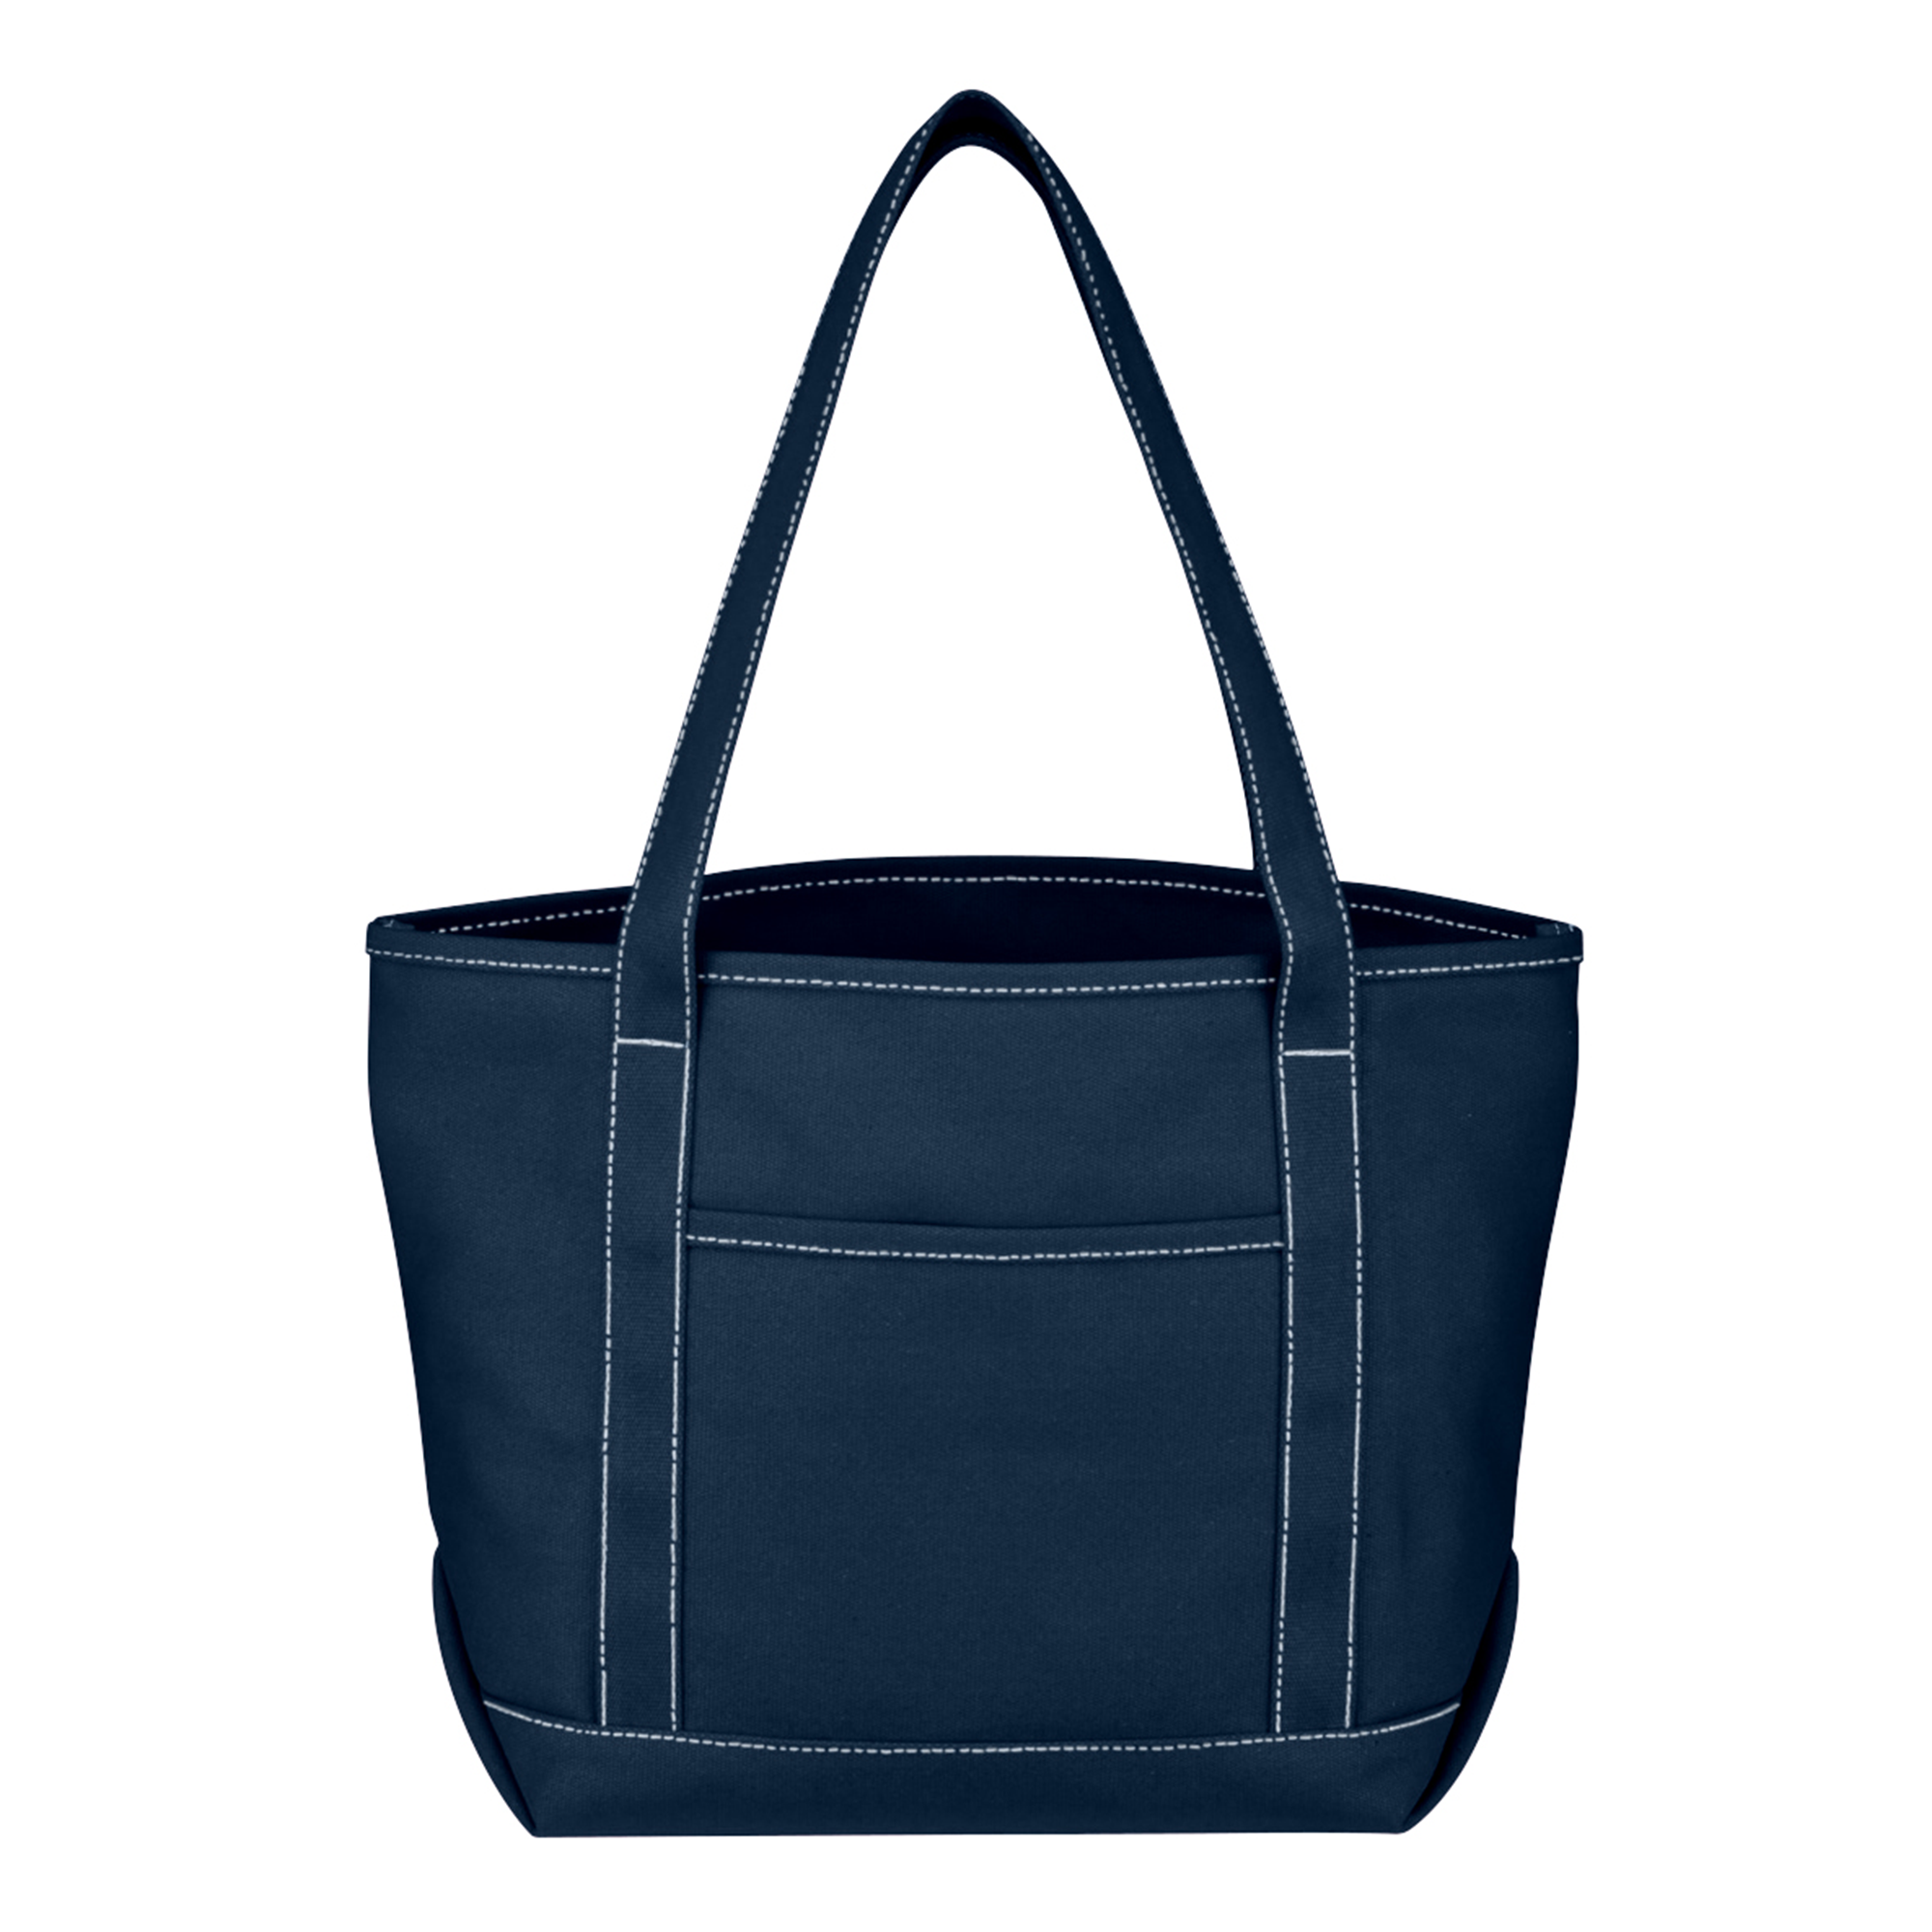 Lands' End Small Print Zip Top Canvas Tote Bag 